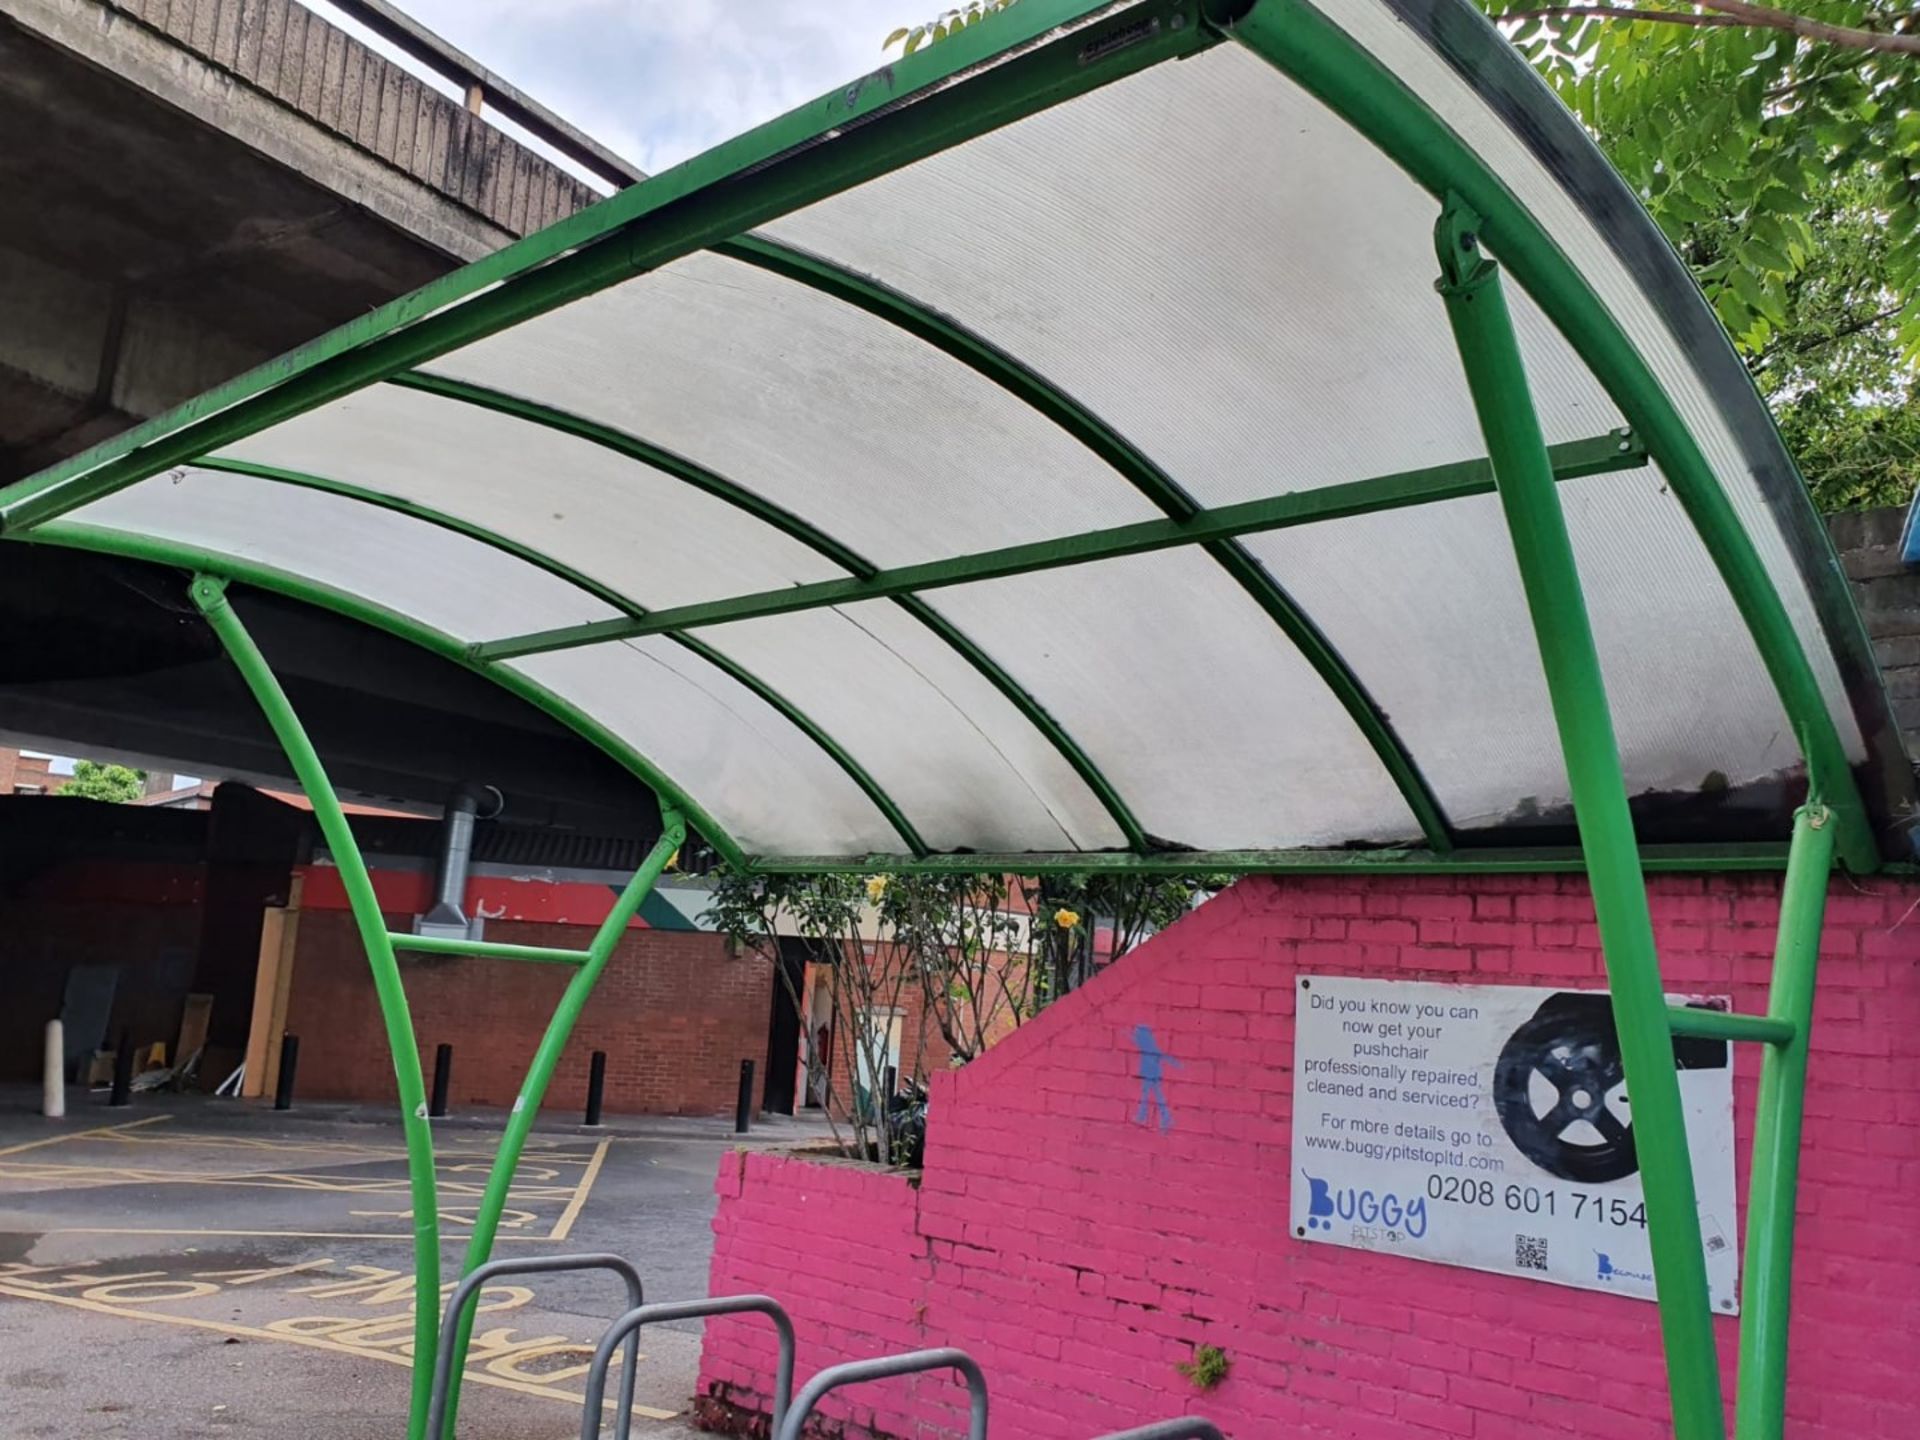 1 x Bike Shelter With Bike Racks - Suitable For Upto 8 Bikes - Contemporary Design - Suitable For - Image 7 of 9